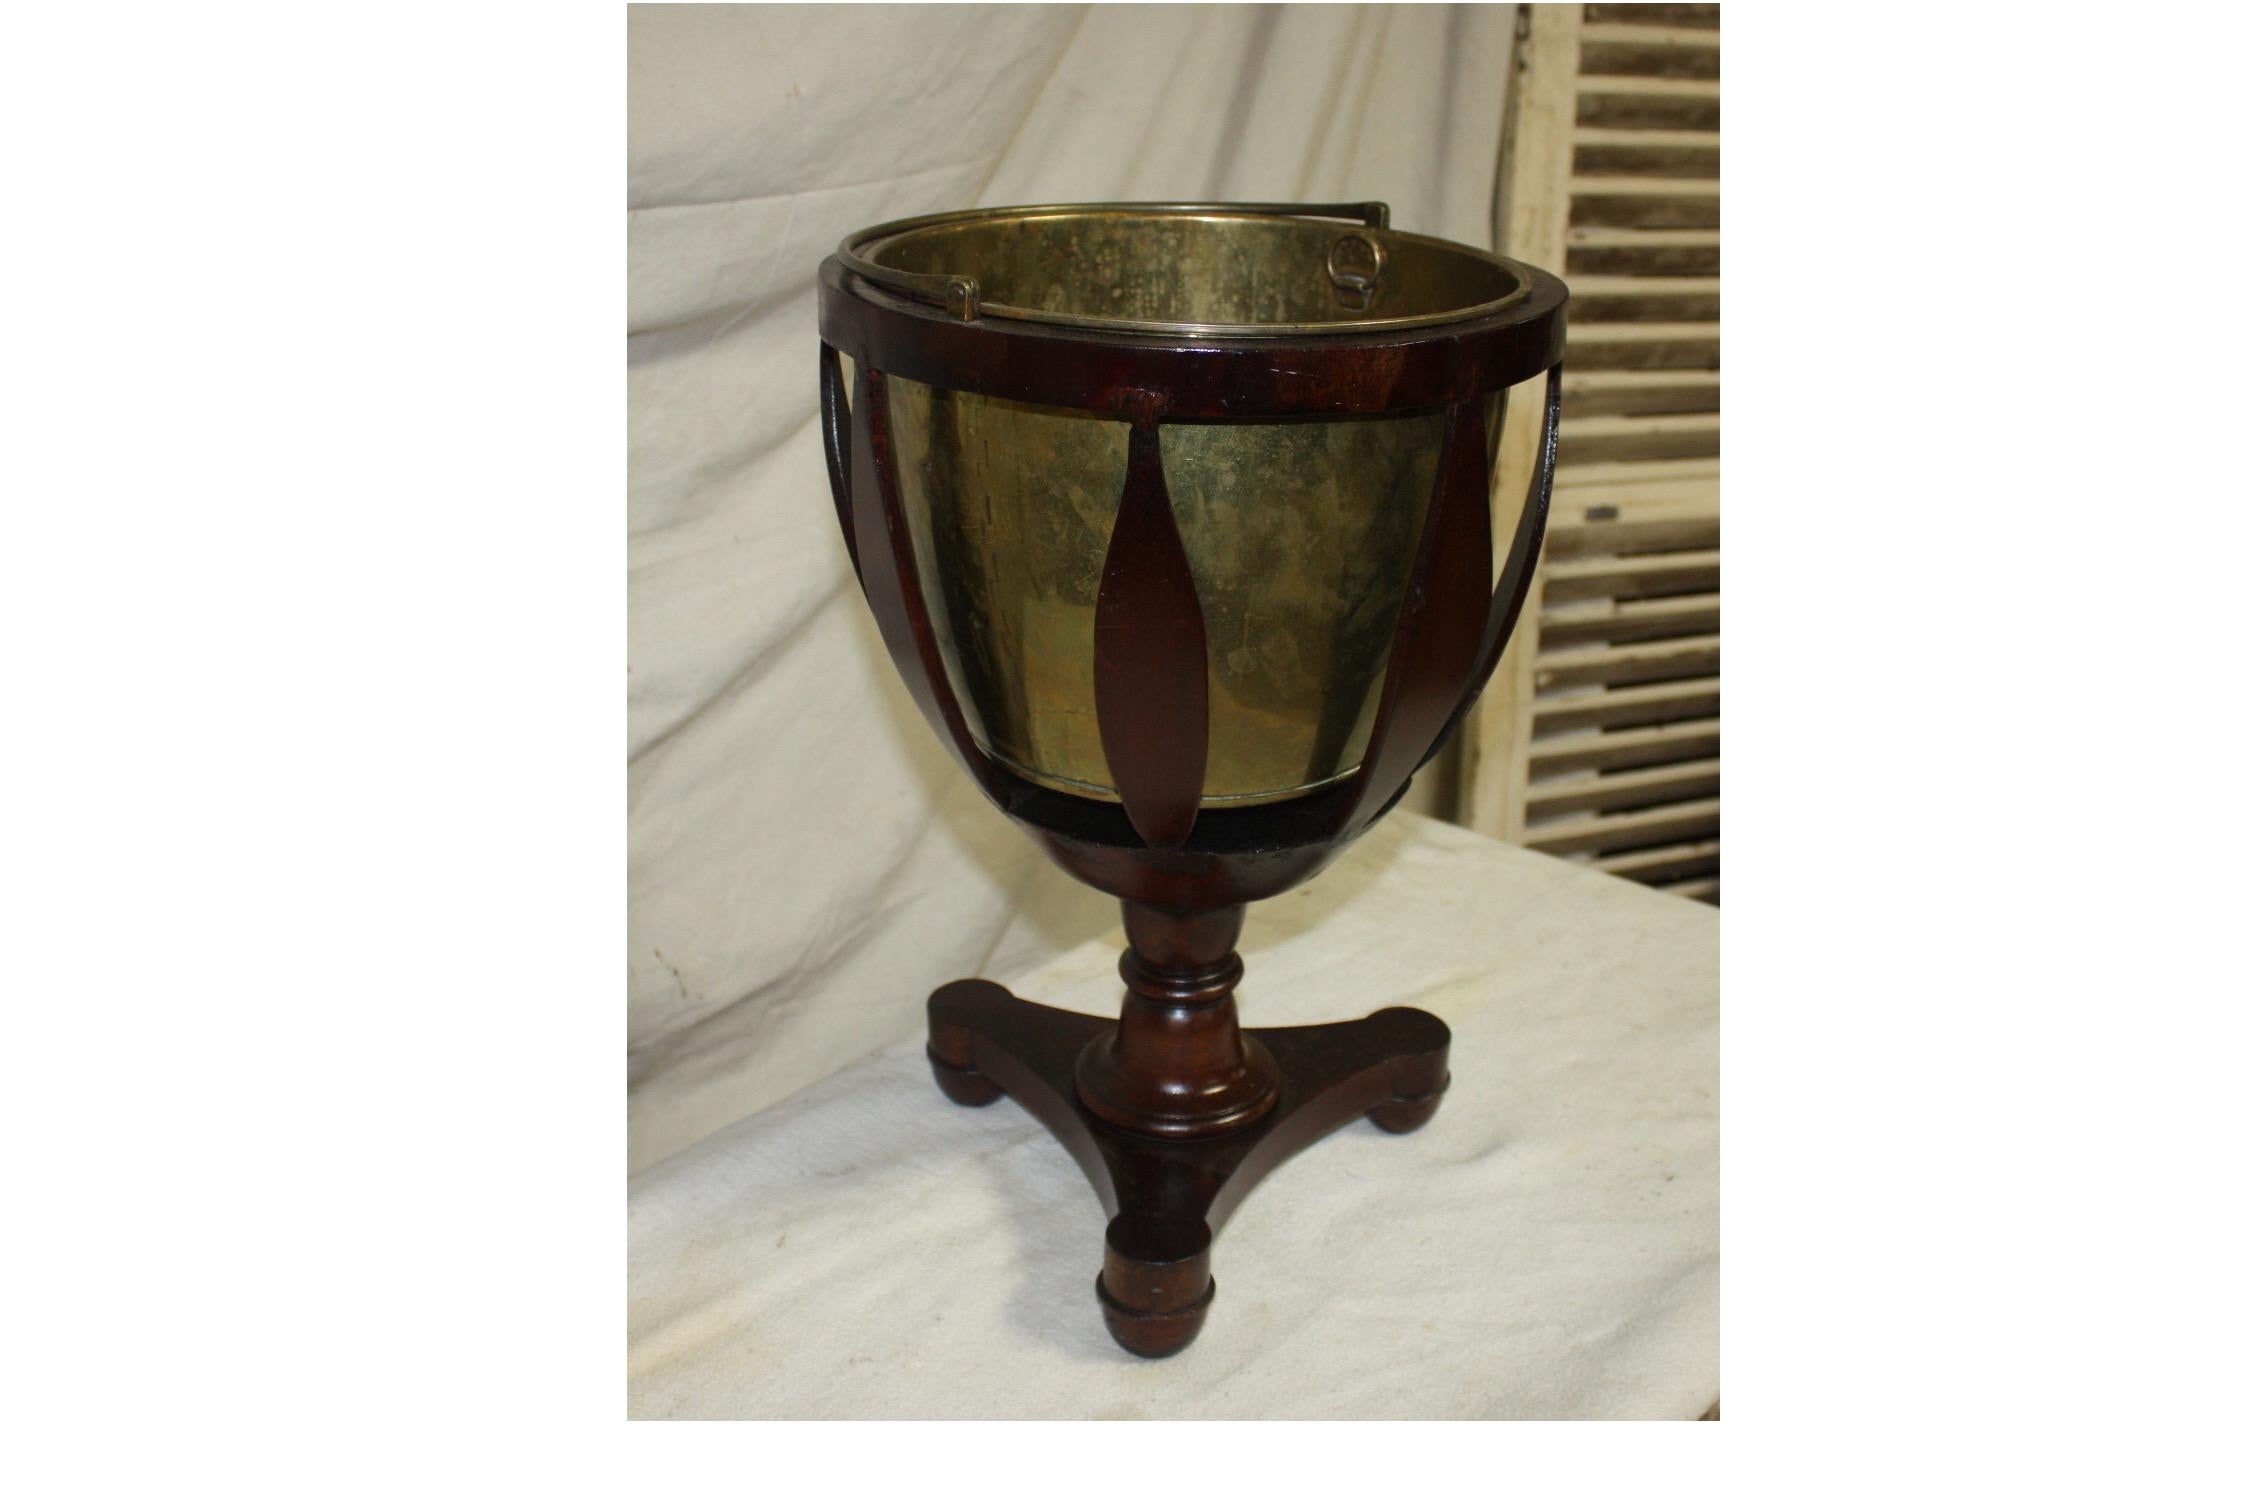 French 19th Century Planter In Excellent Condition For Sale In Stockbridge, GA